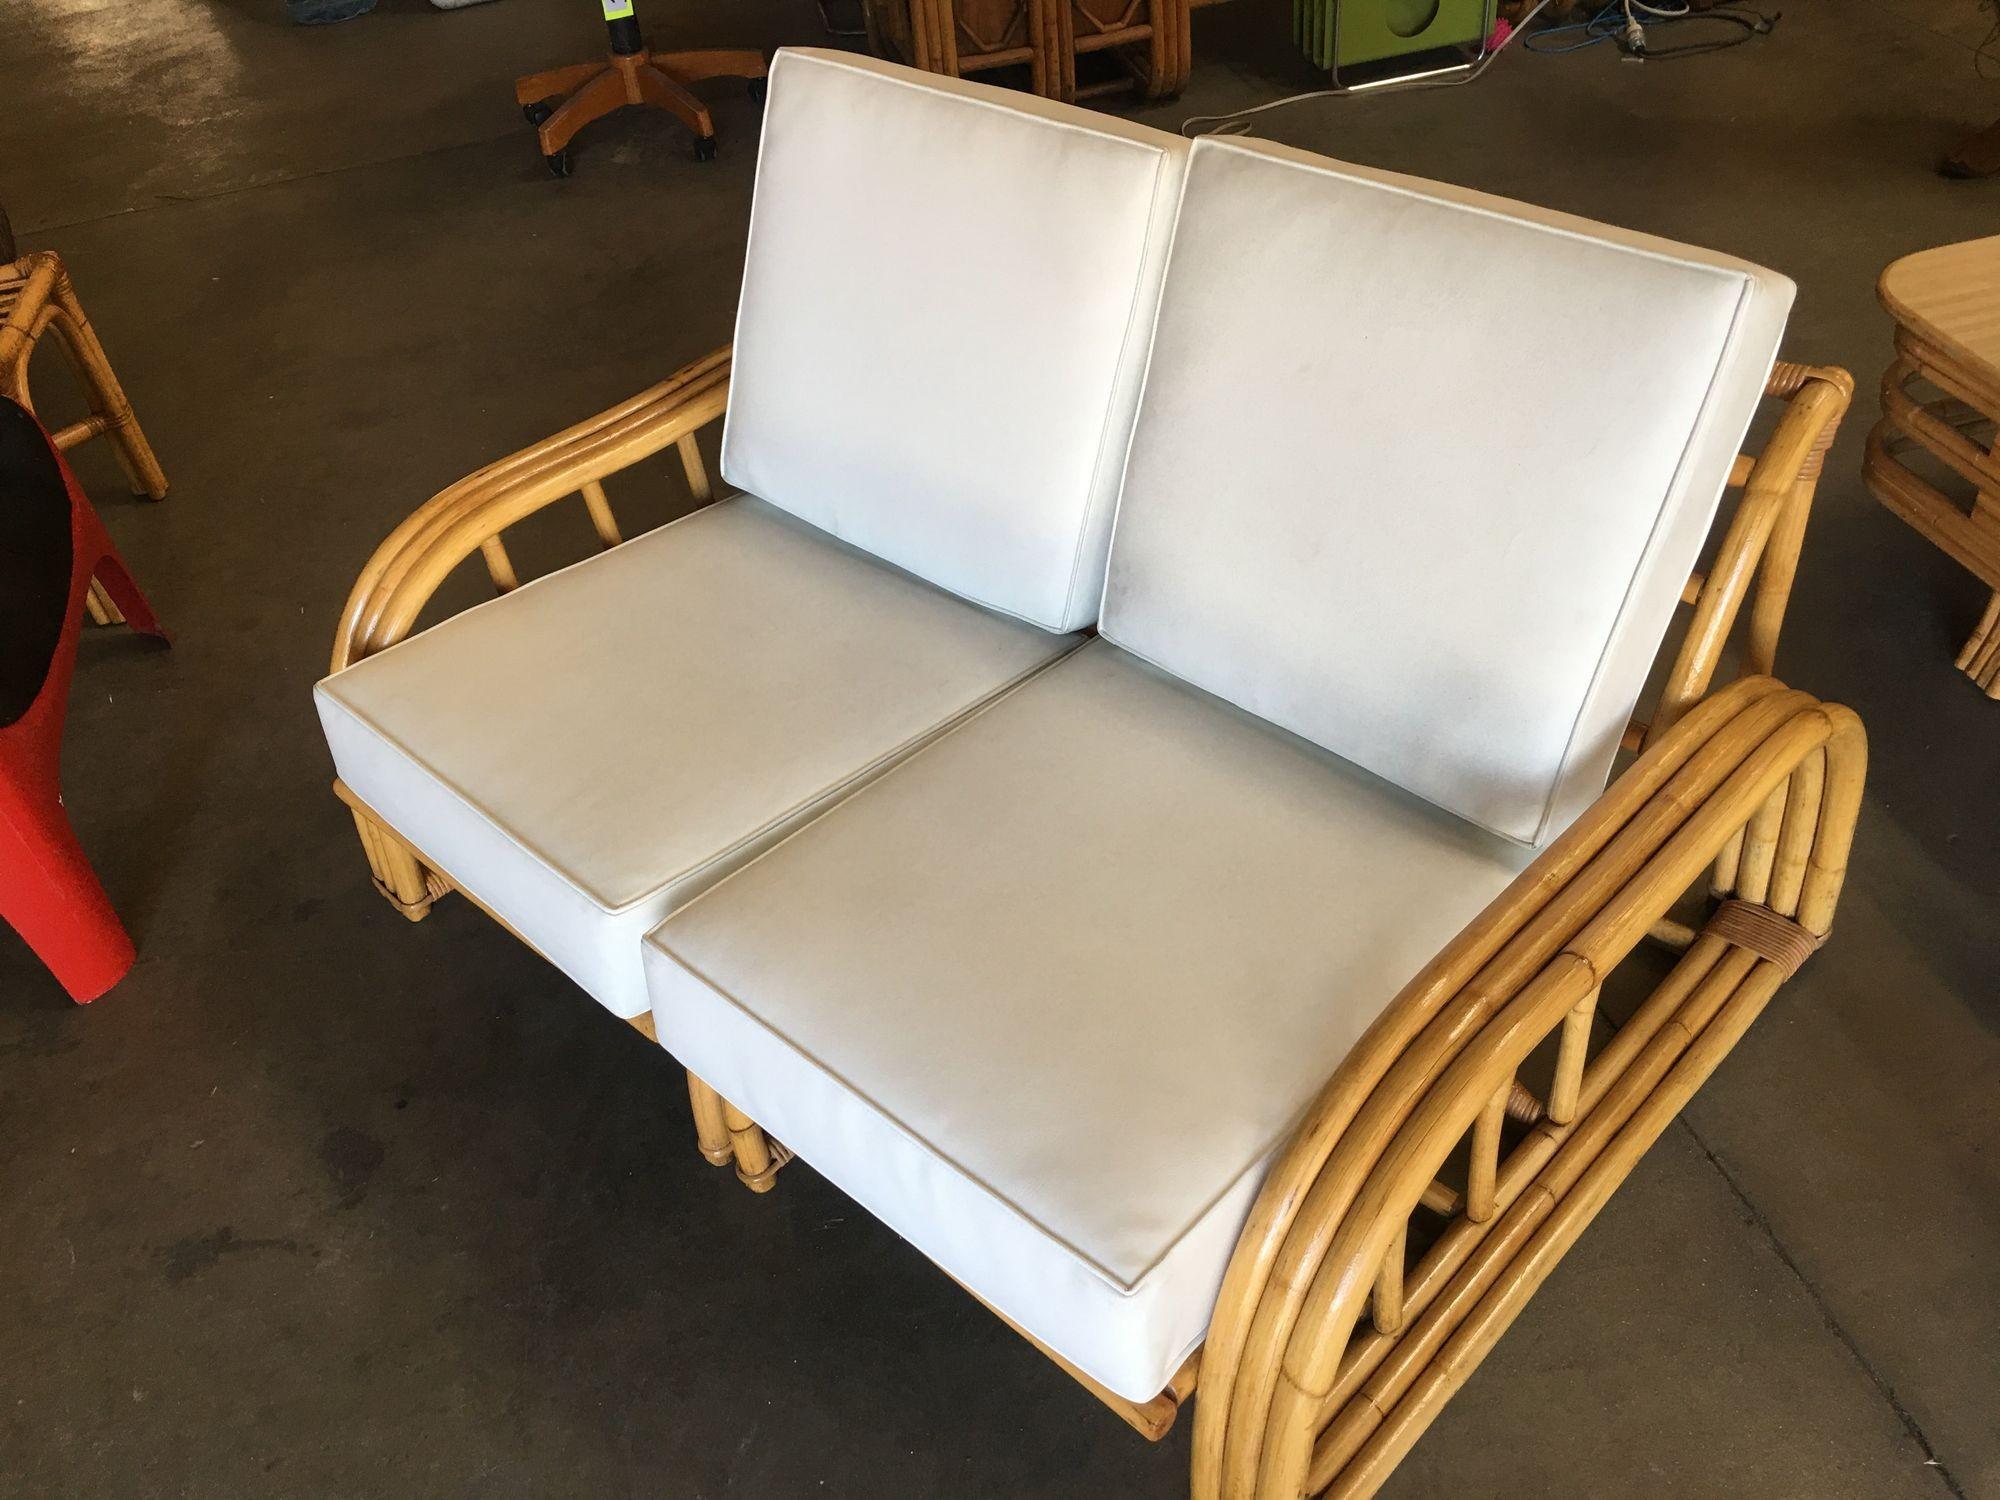 Rare museum quality Paul Laszlo three-strand rattan settee. This loveseat dates from 1941 and features a unique arched arm and lounge arched seat back.

1950, United States

We only purchase and sell only the best and finest rattan furniture made by